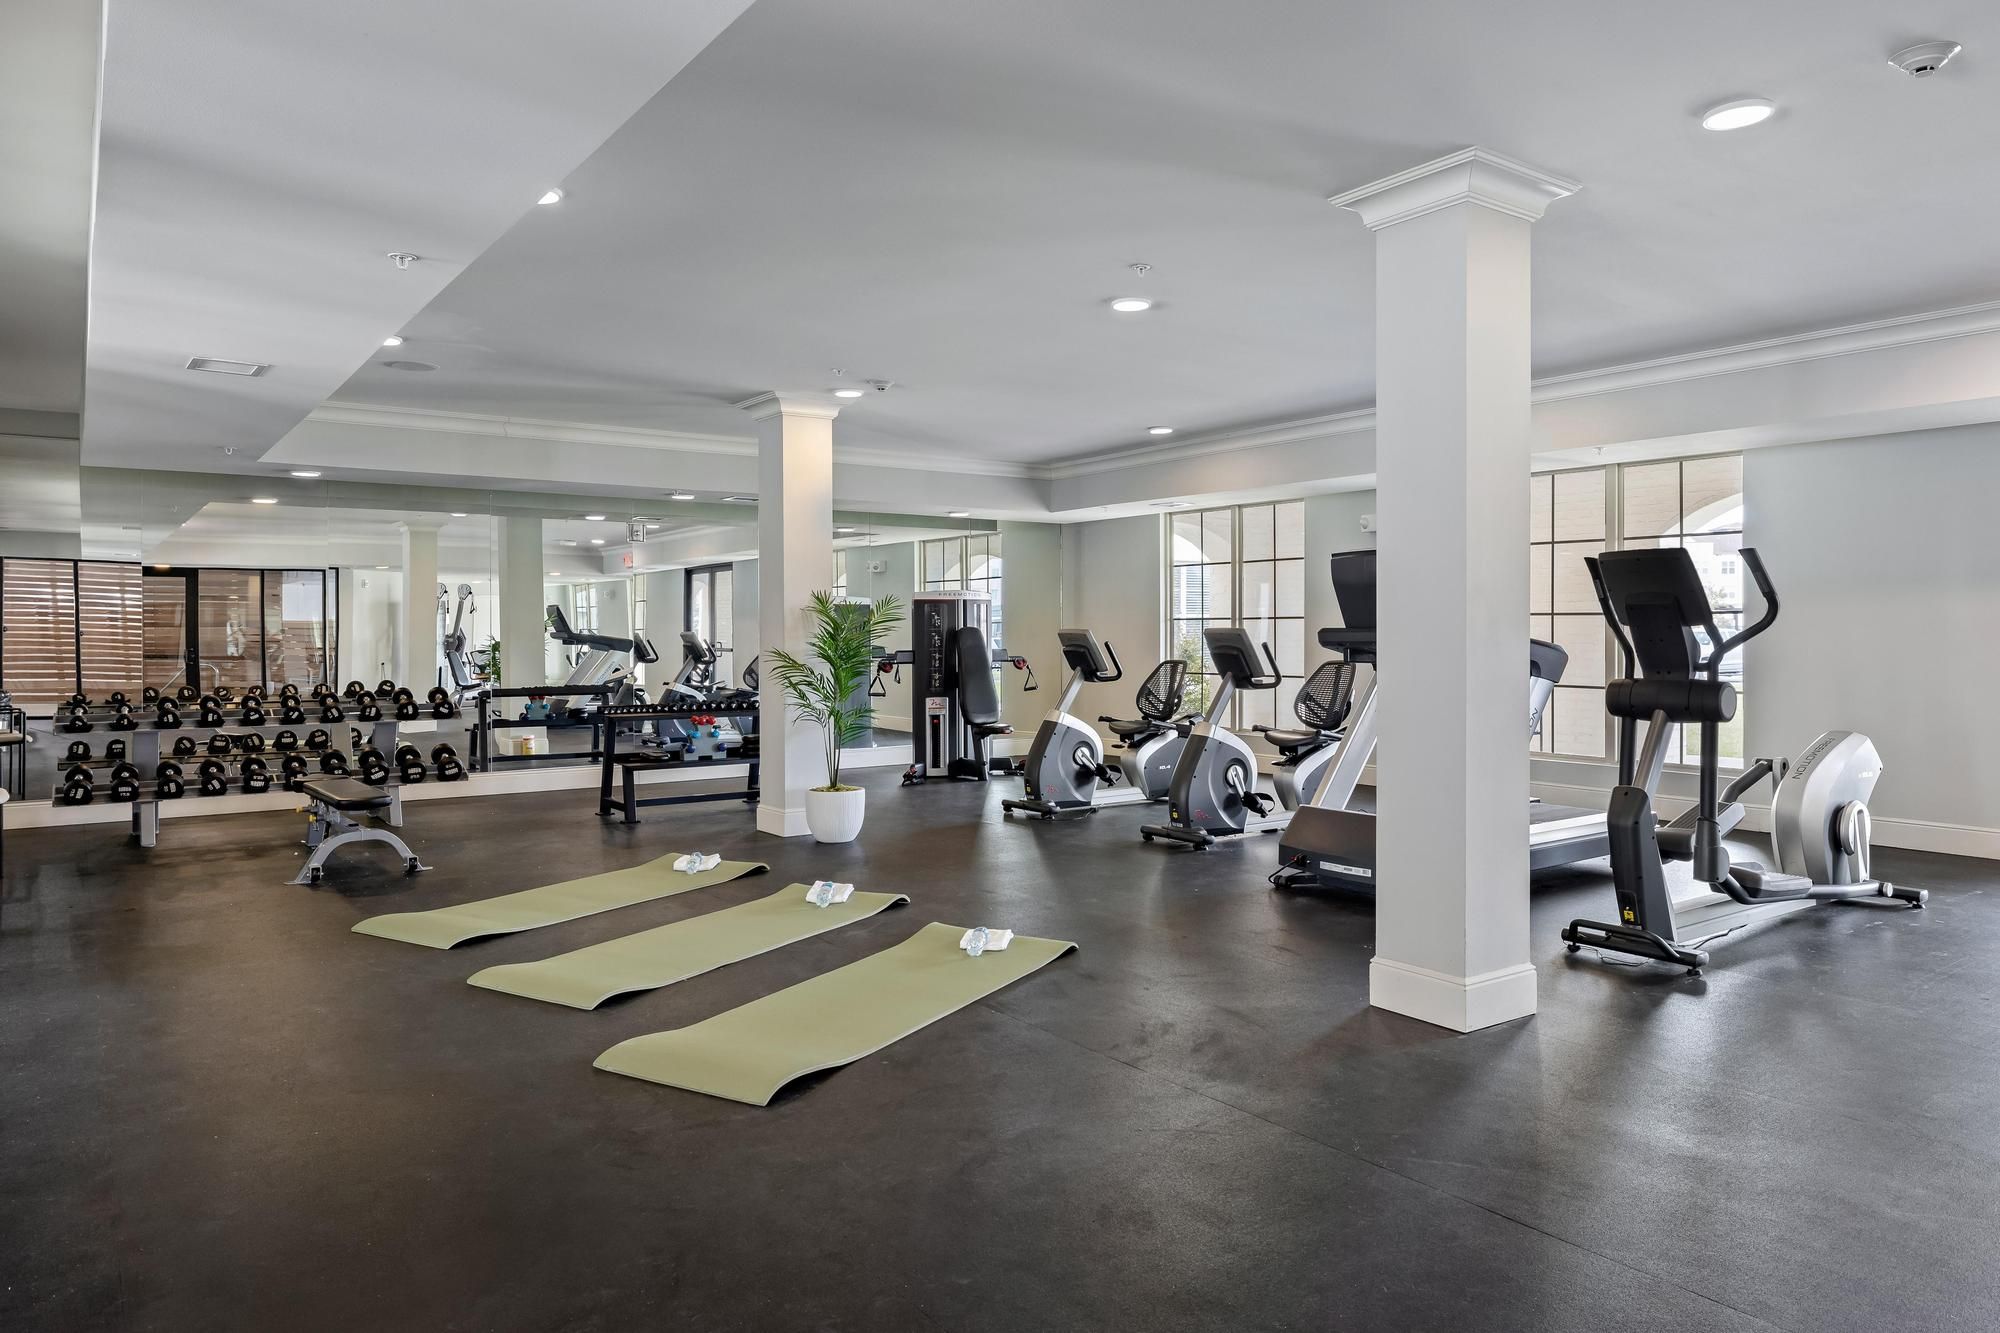 The Claiborne at Baton Rouge gym with exercise equipment and on-site therapy services